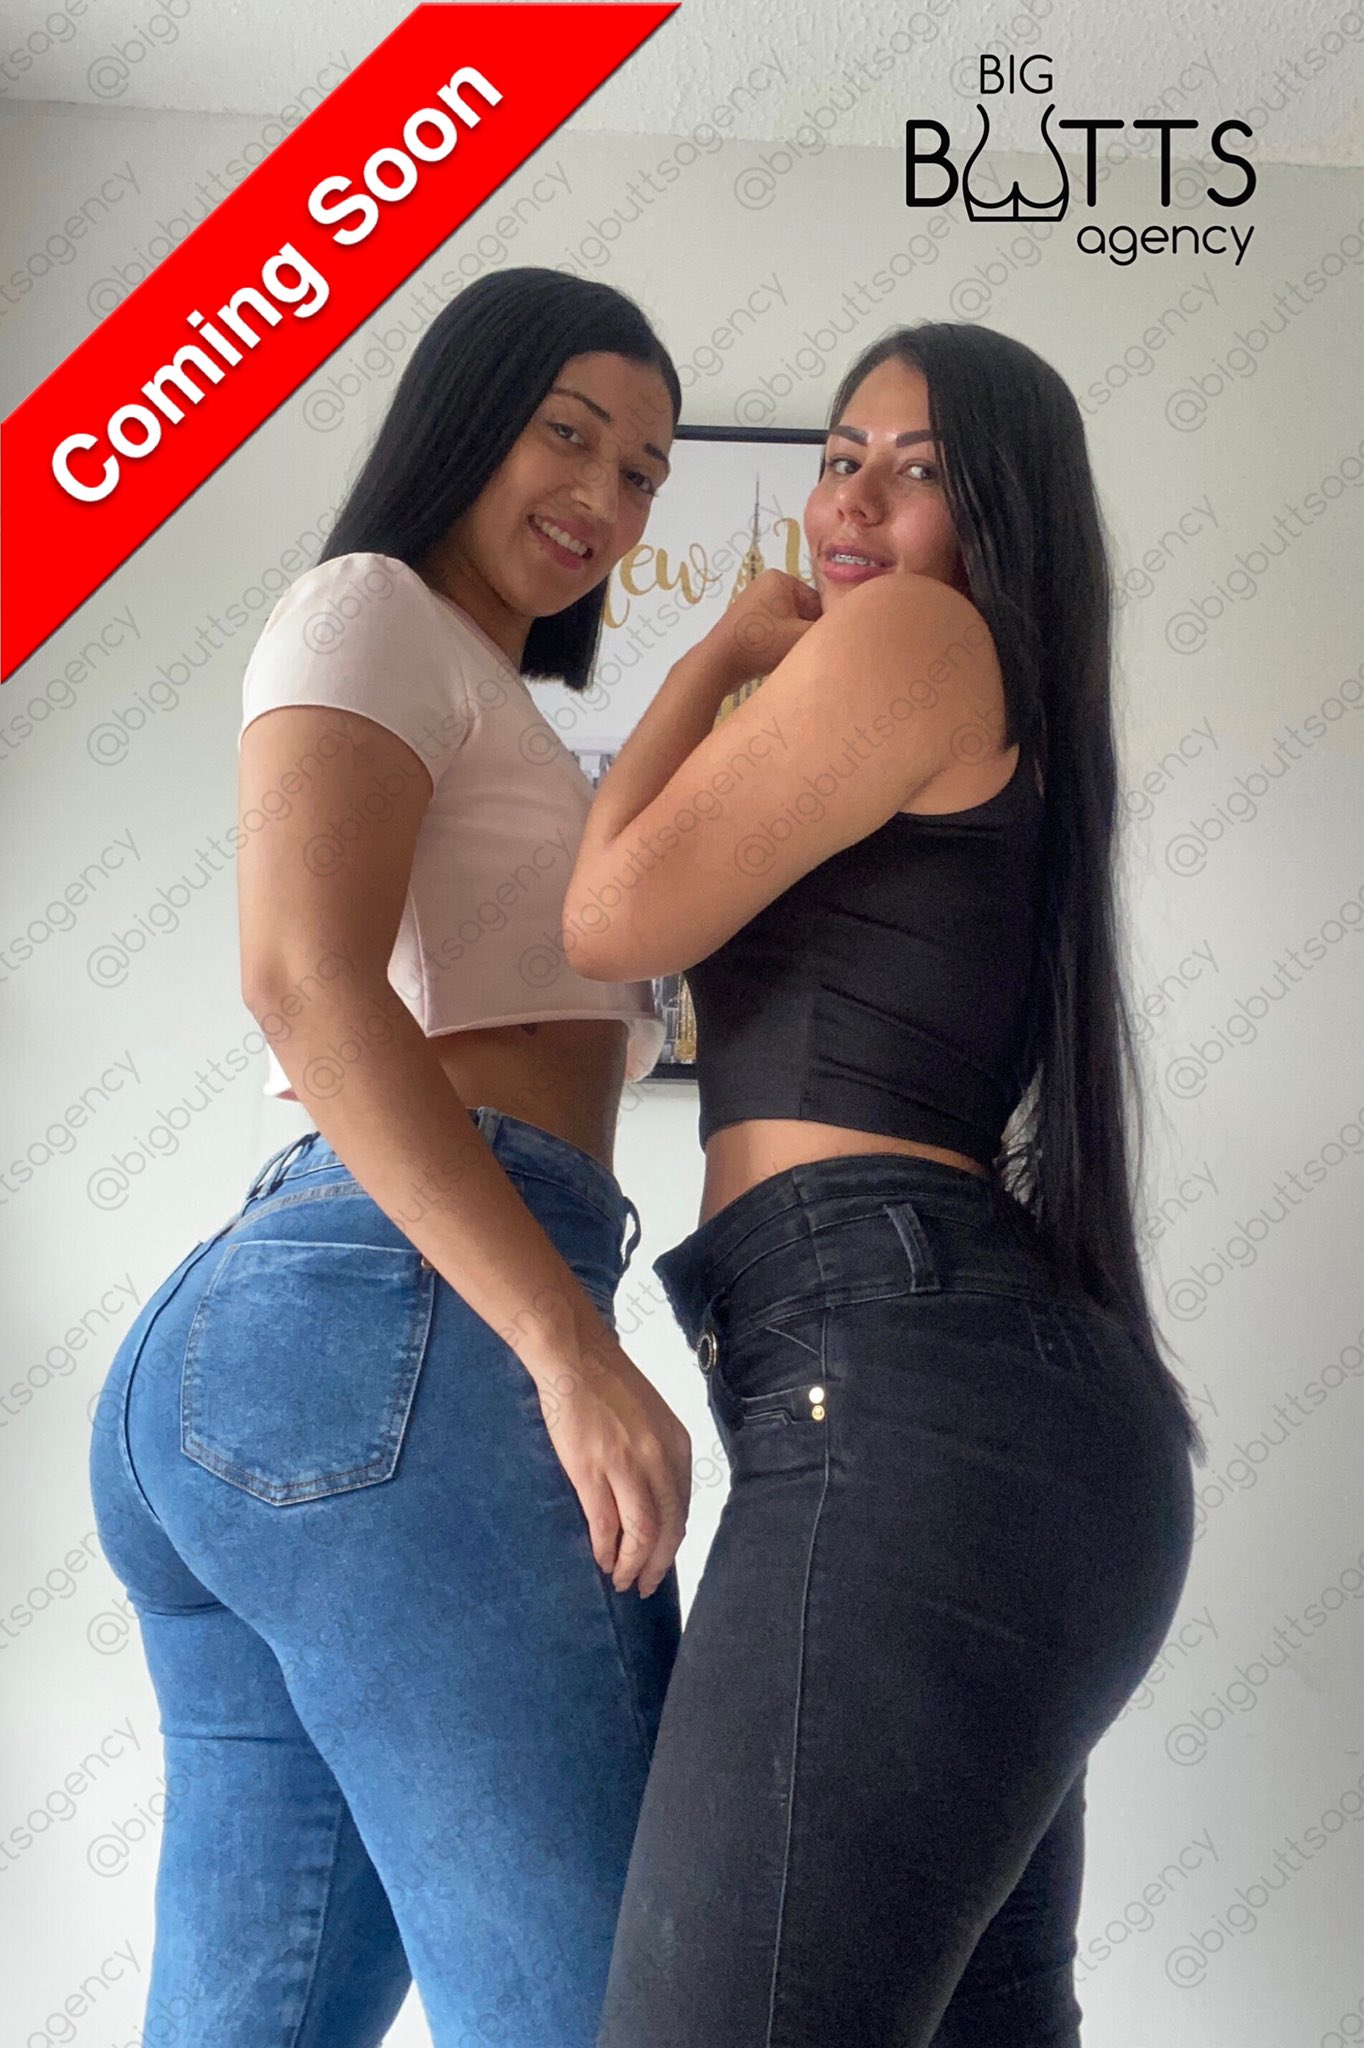 Ms kingdom big ass Big Butts Agency On Twitter Bigbuttsapphire And Scar Oconnor Finally Together Will Make History